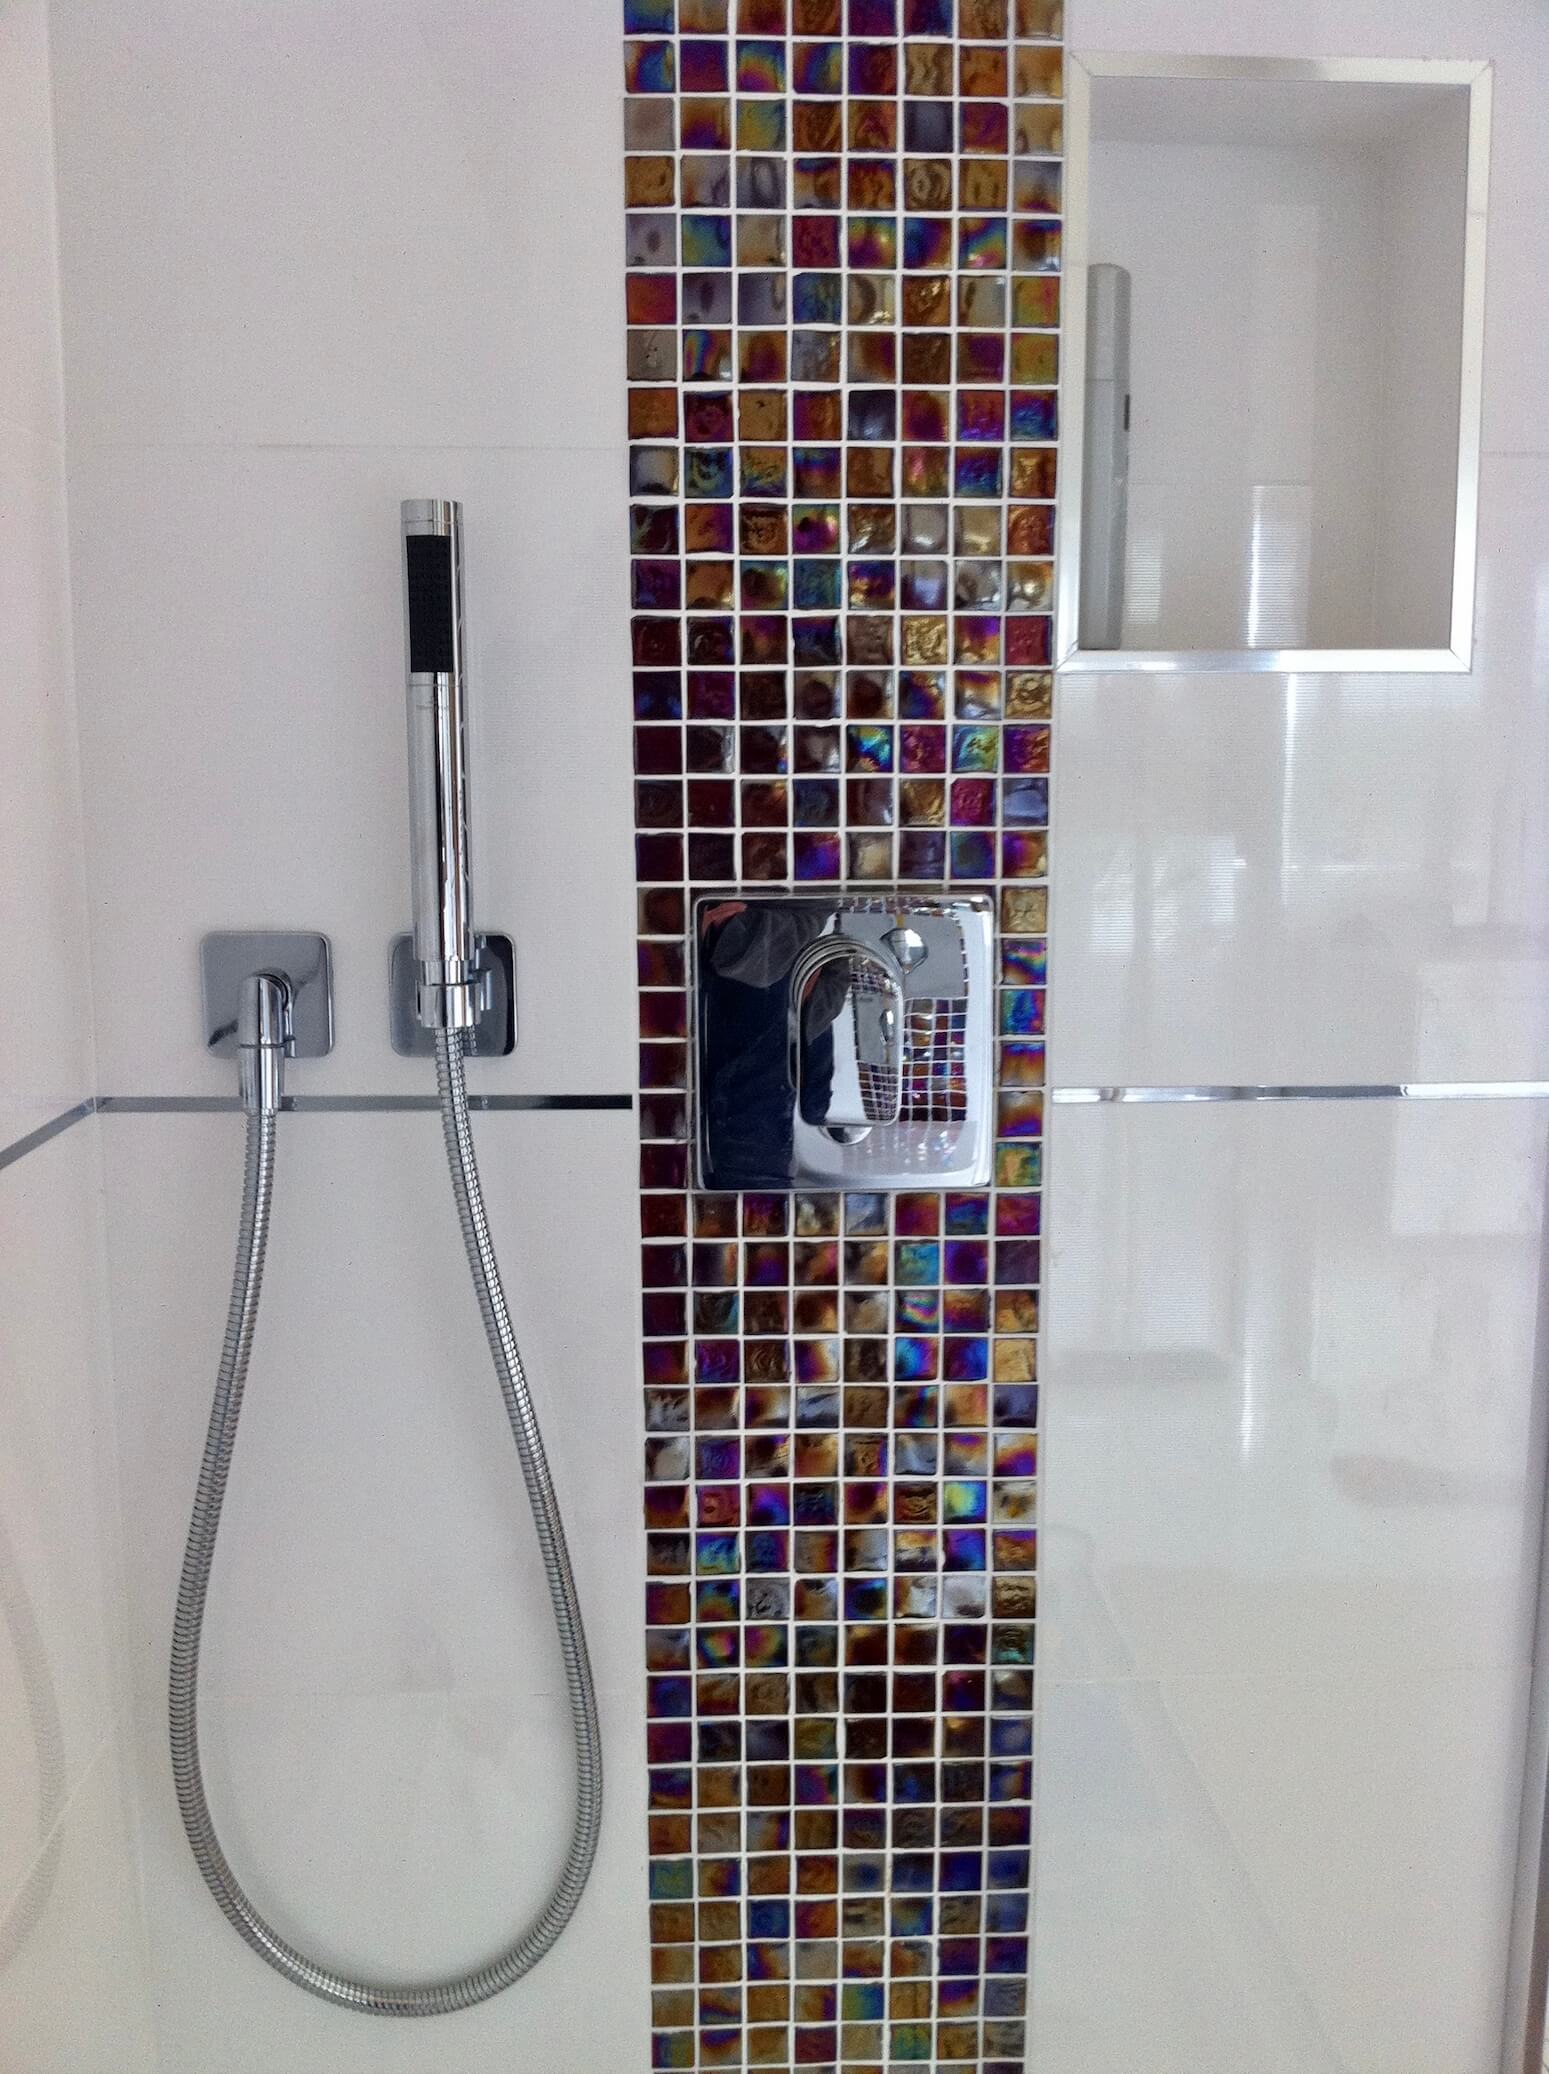 Beautifully tiled shower room with a strip of mosaic tiles as a main feature in the shower.